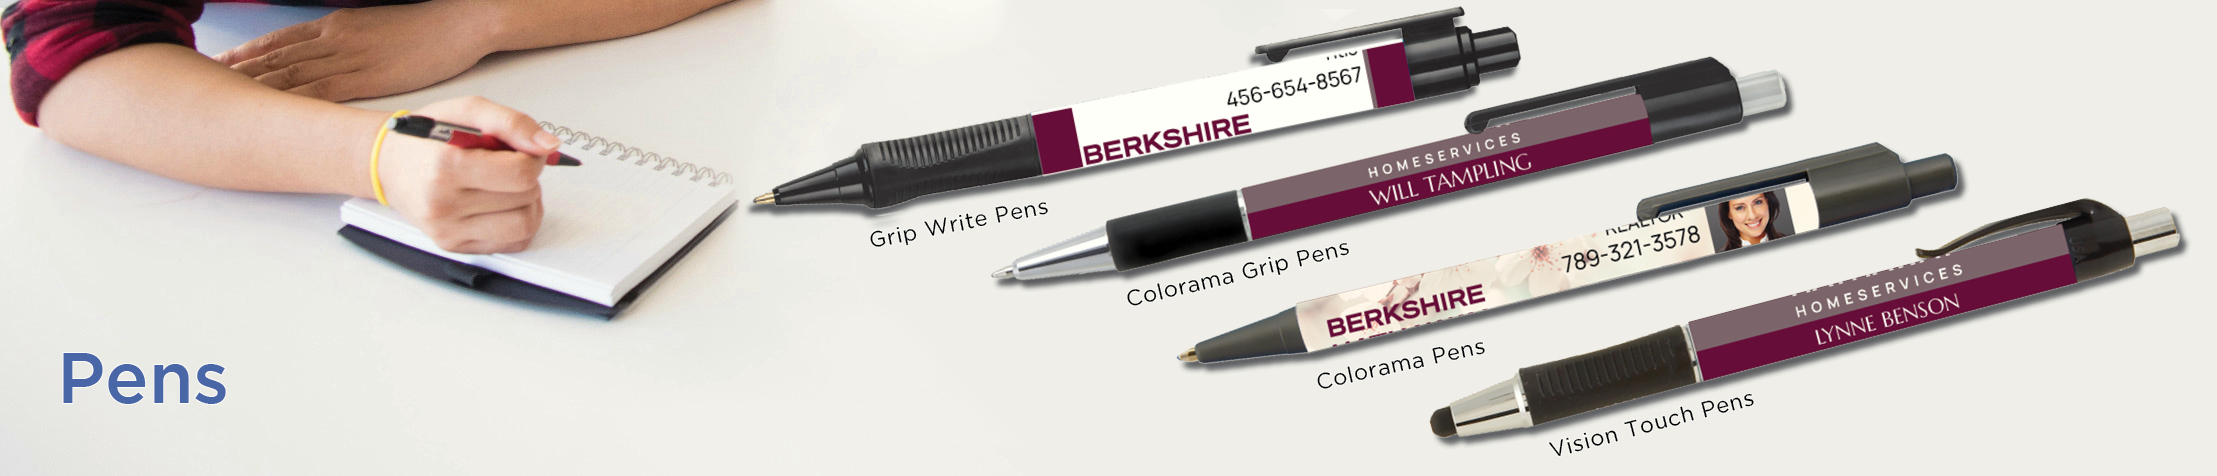 Berkshire Hathaway Real Estate Personalized Pens - promotional products: Grip Write Pens, Colorama Pens, Vision Touch Pens, and Colorama Grip Pens | BestPrintBuy.com